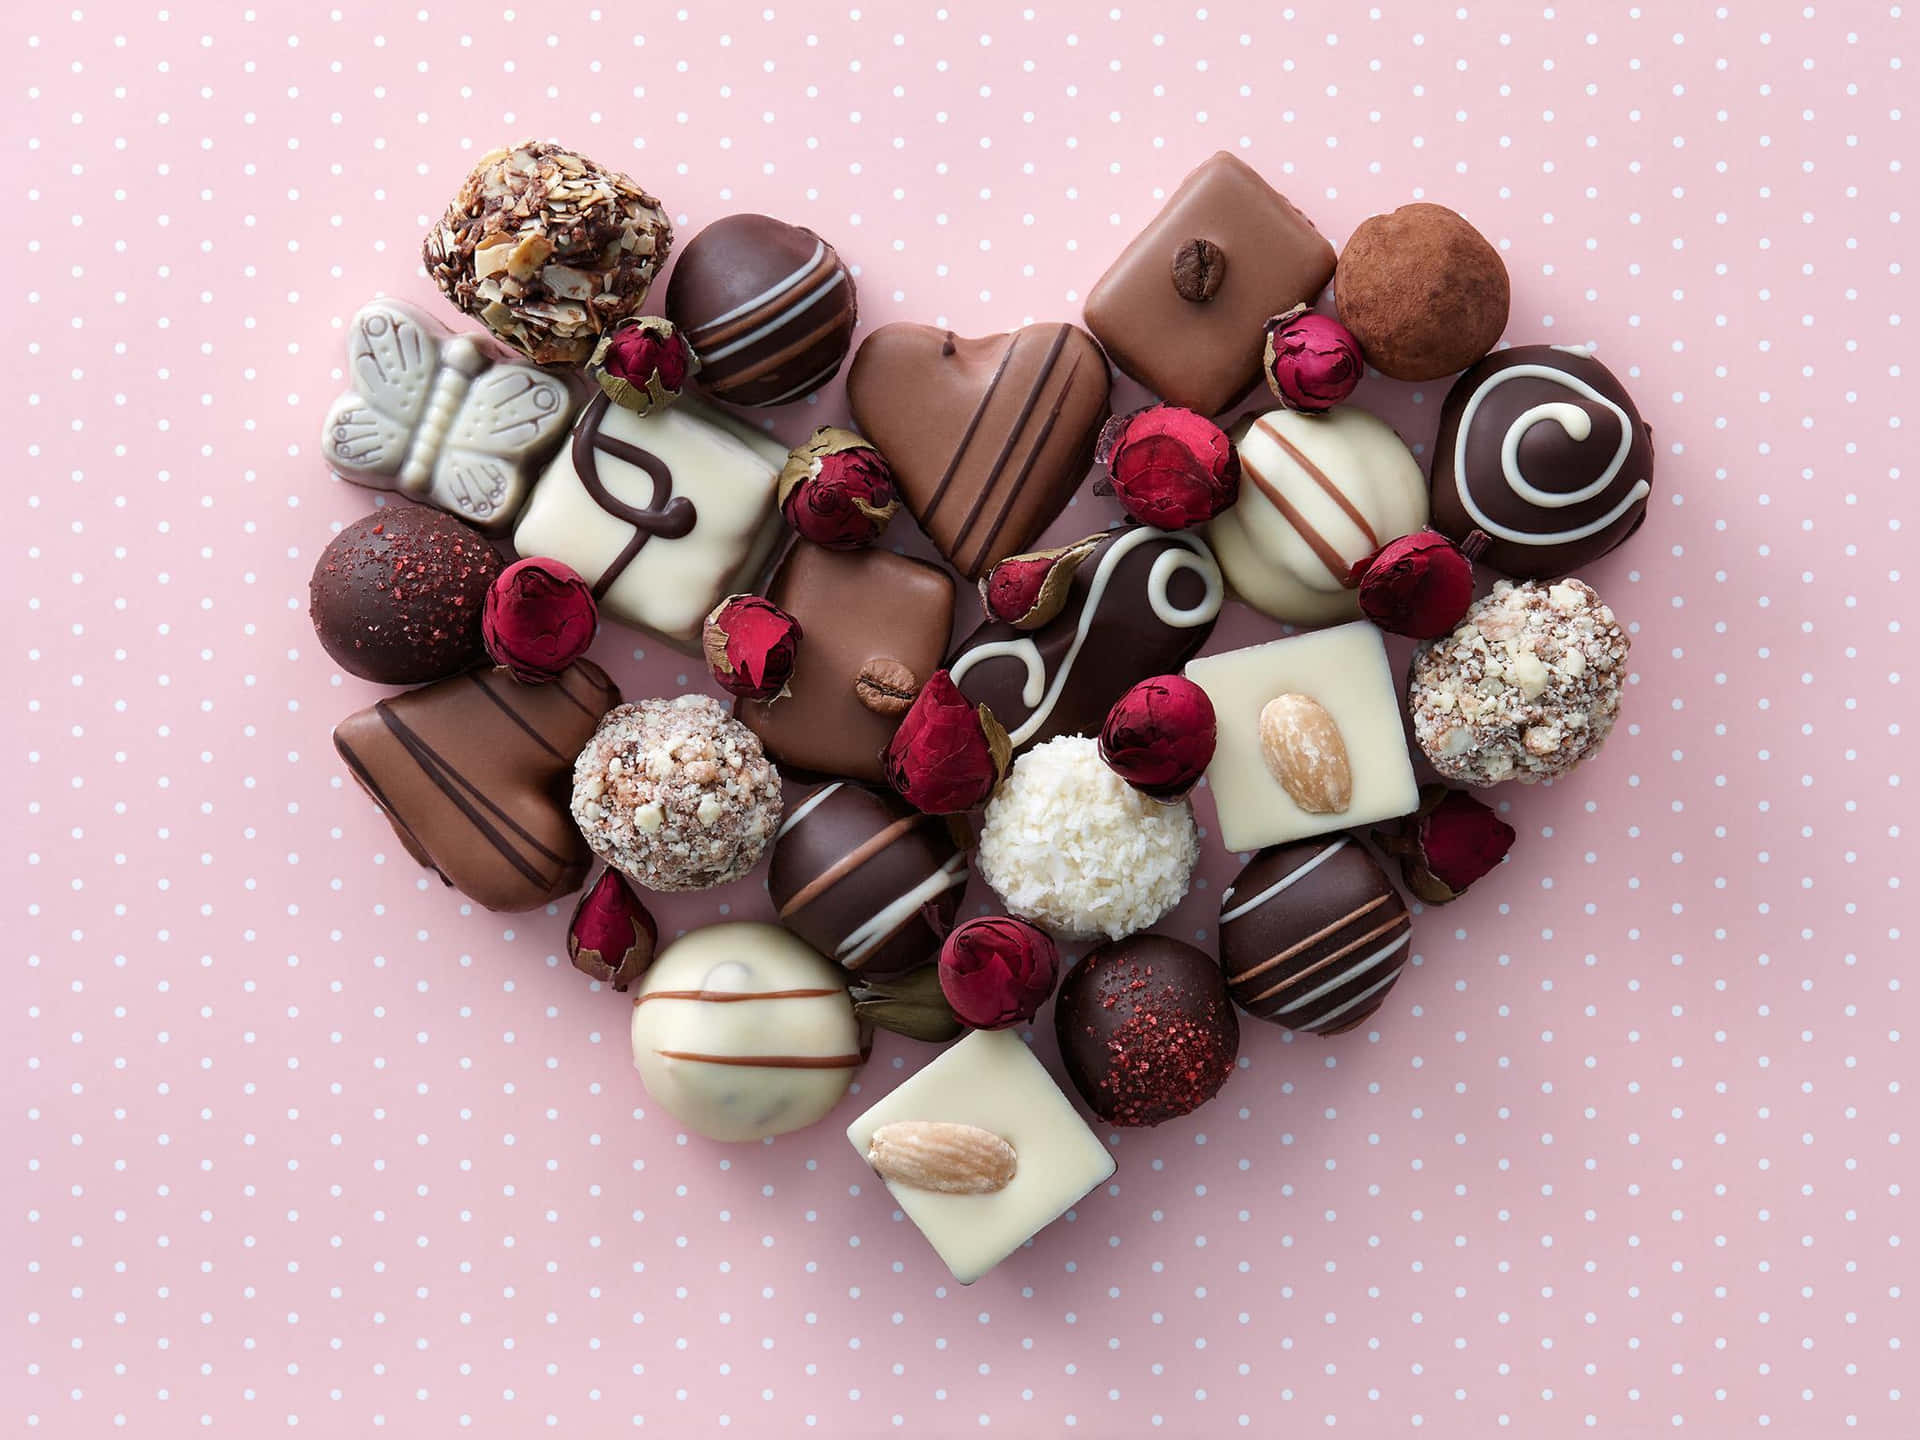 Chocolates arranged in a heart shape on a pink background - Chocolate